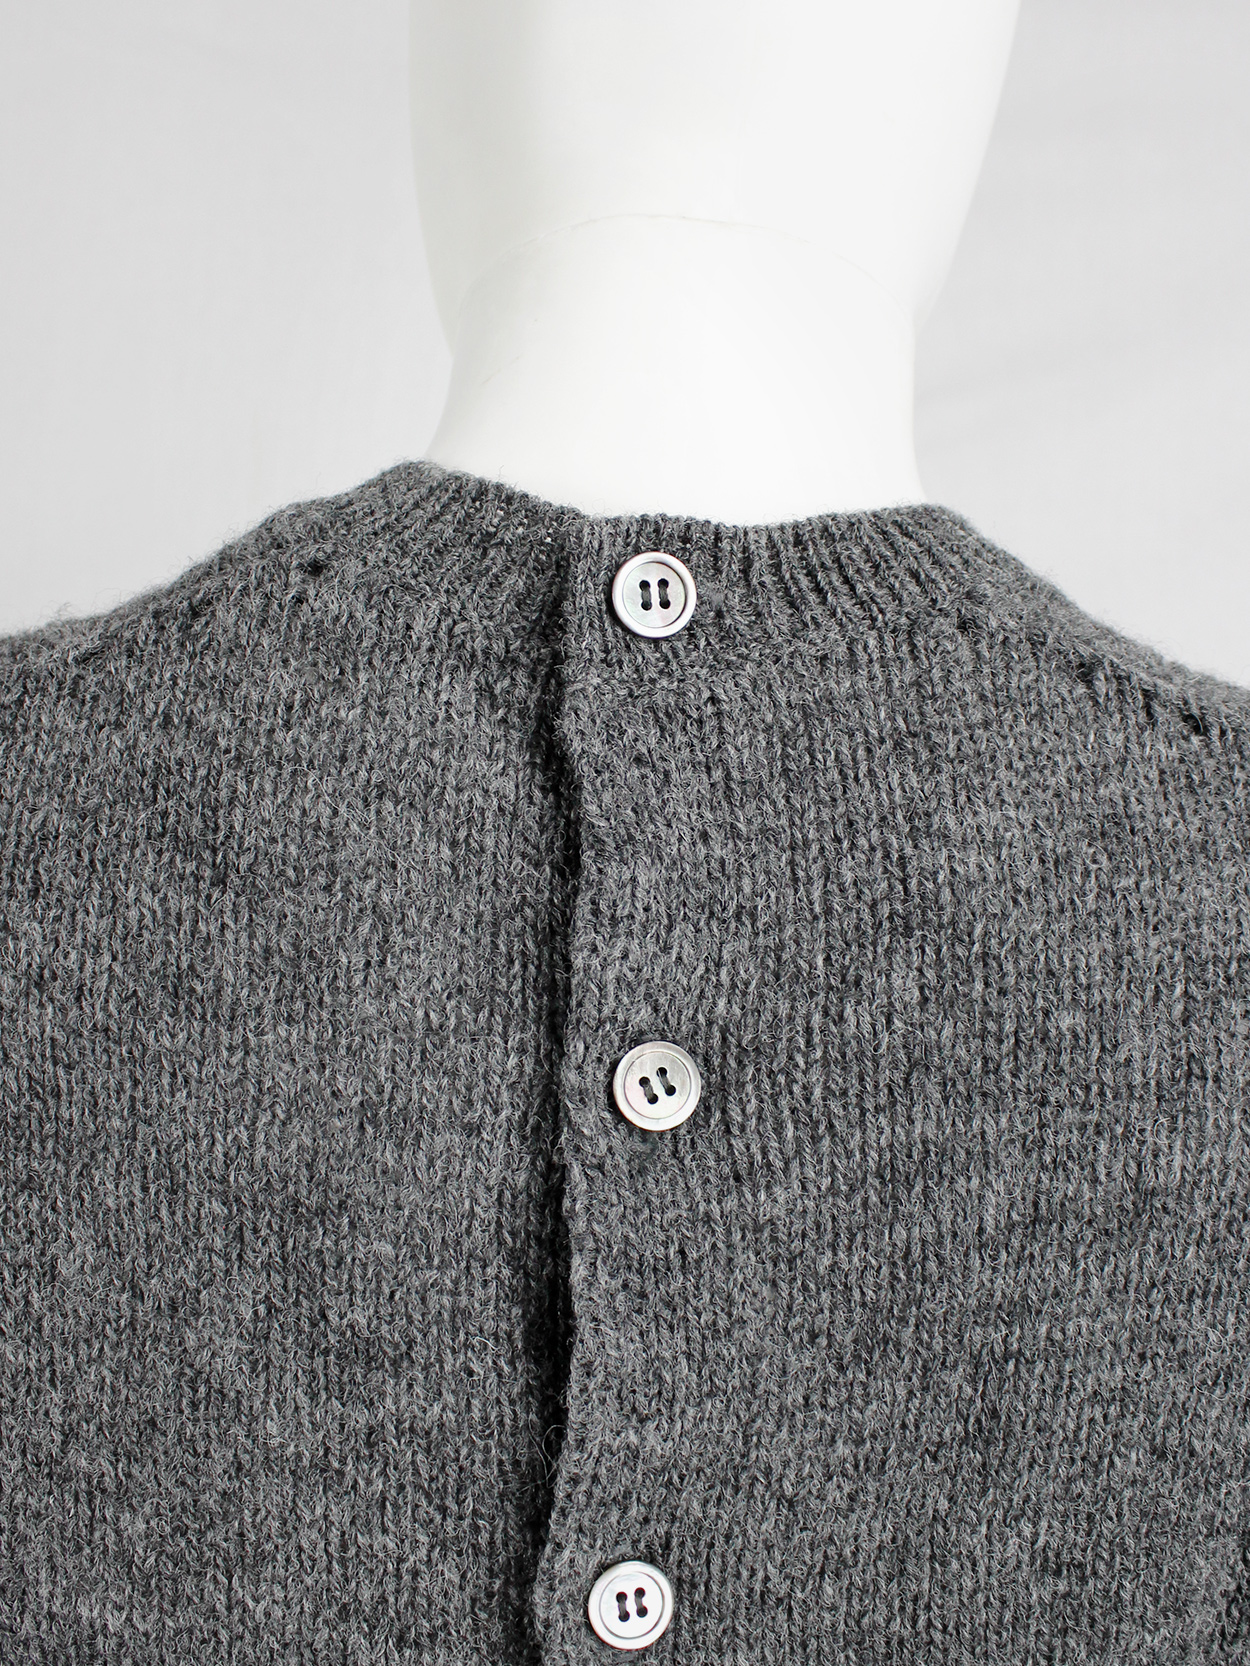 Comme des Garçons tricot grey and black destroyed cardigan with 